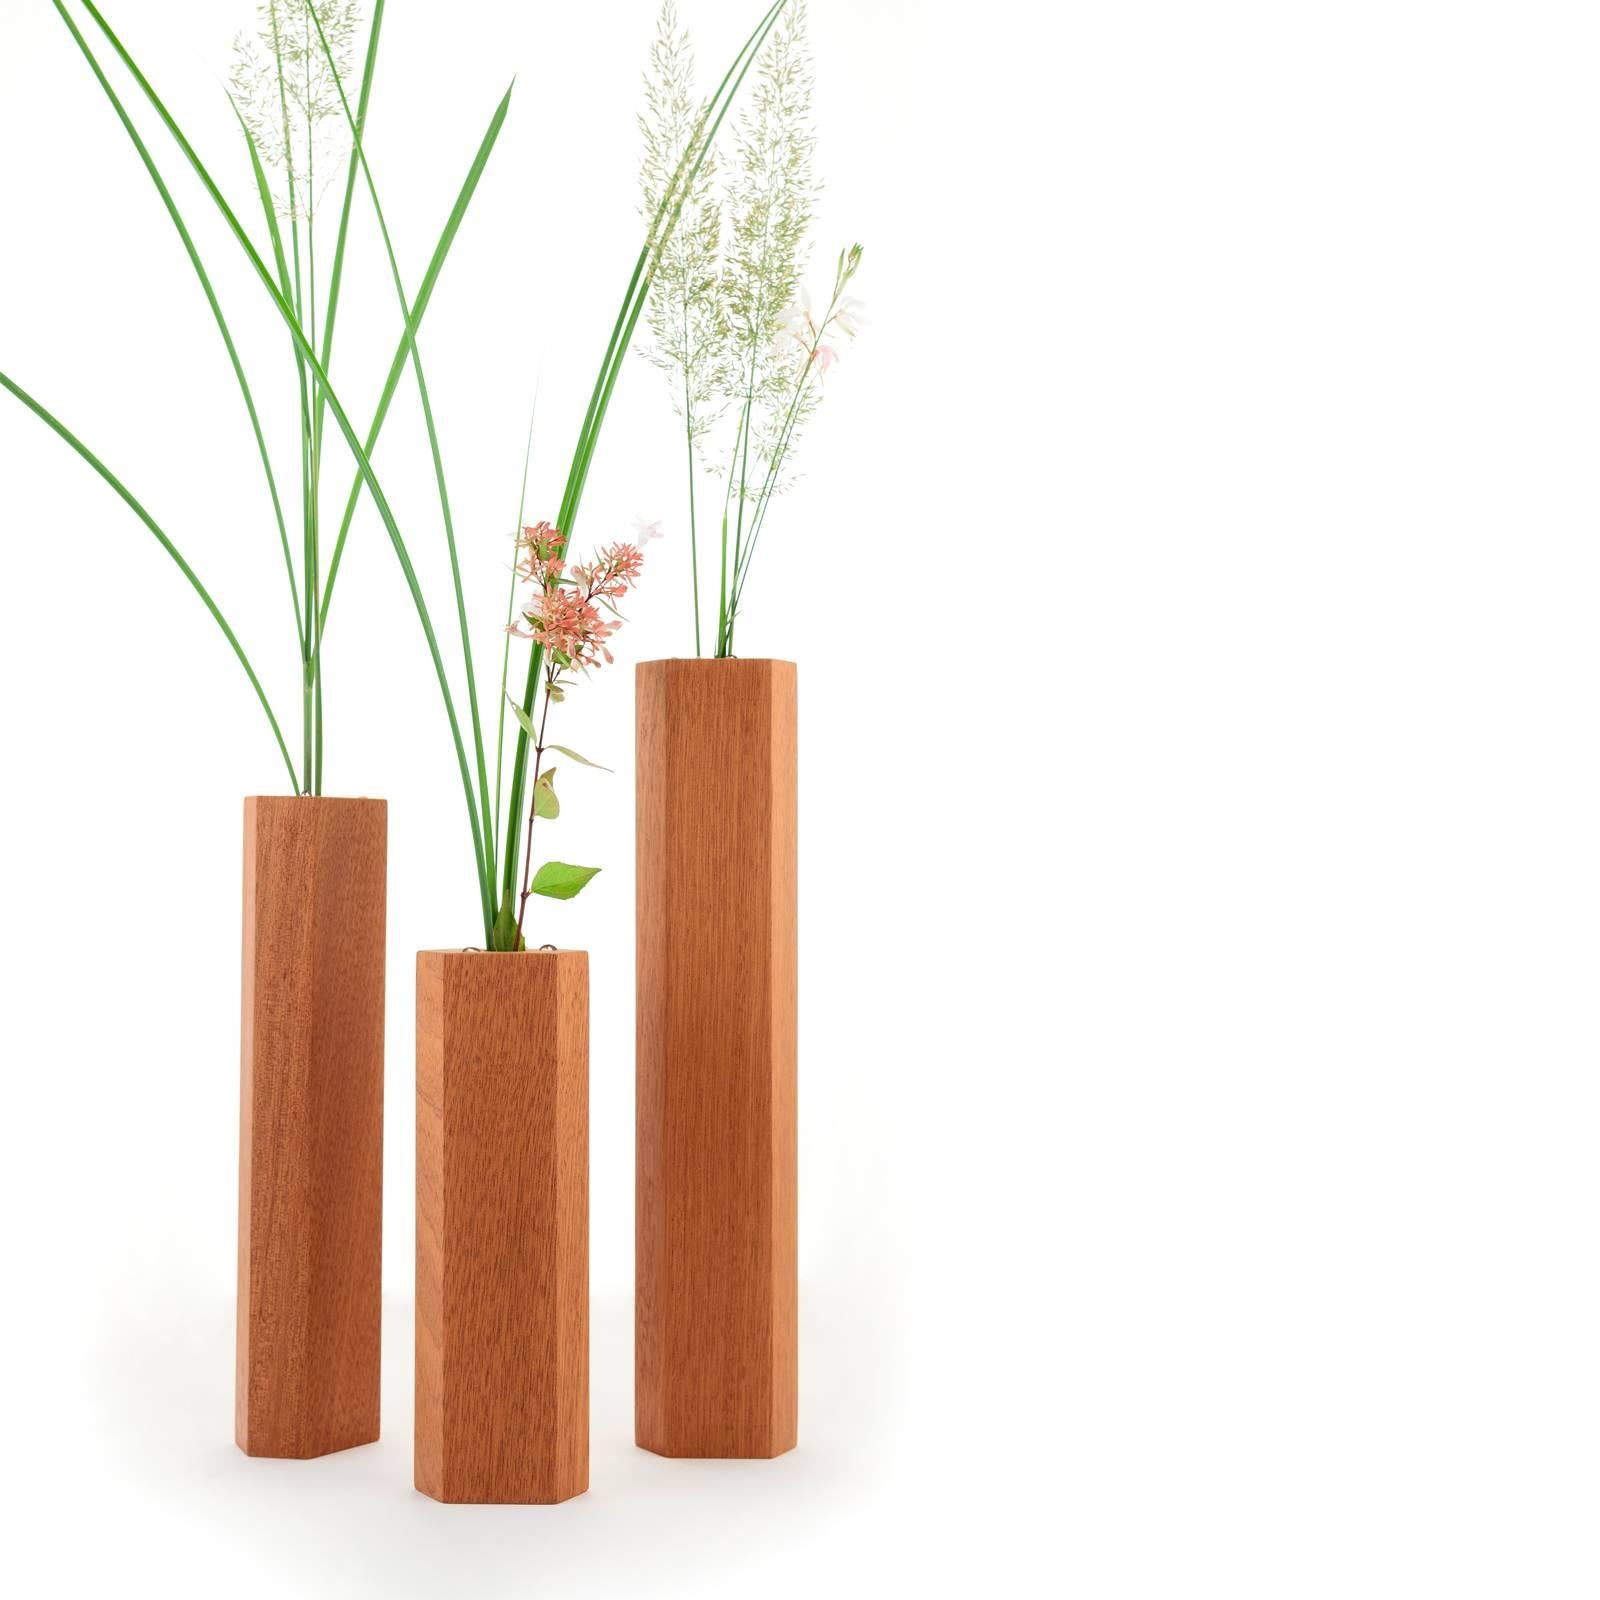 Description: Crafted from solid wood with a glass tube insert. The three different sized blocks come together to create a dynamic composition, playing off each other's facets. the Bloc single-bud vase is hexagonally shaped with facets that absorb